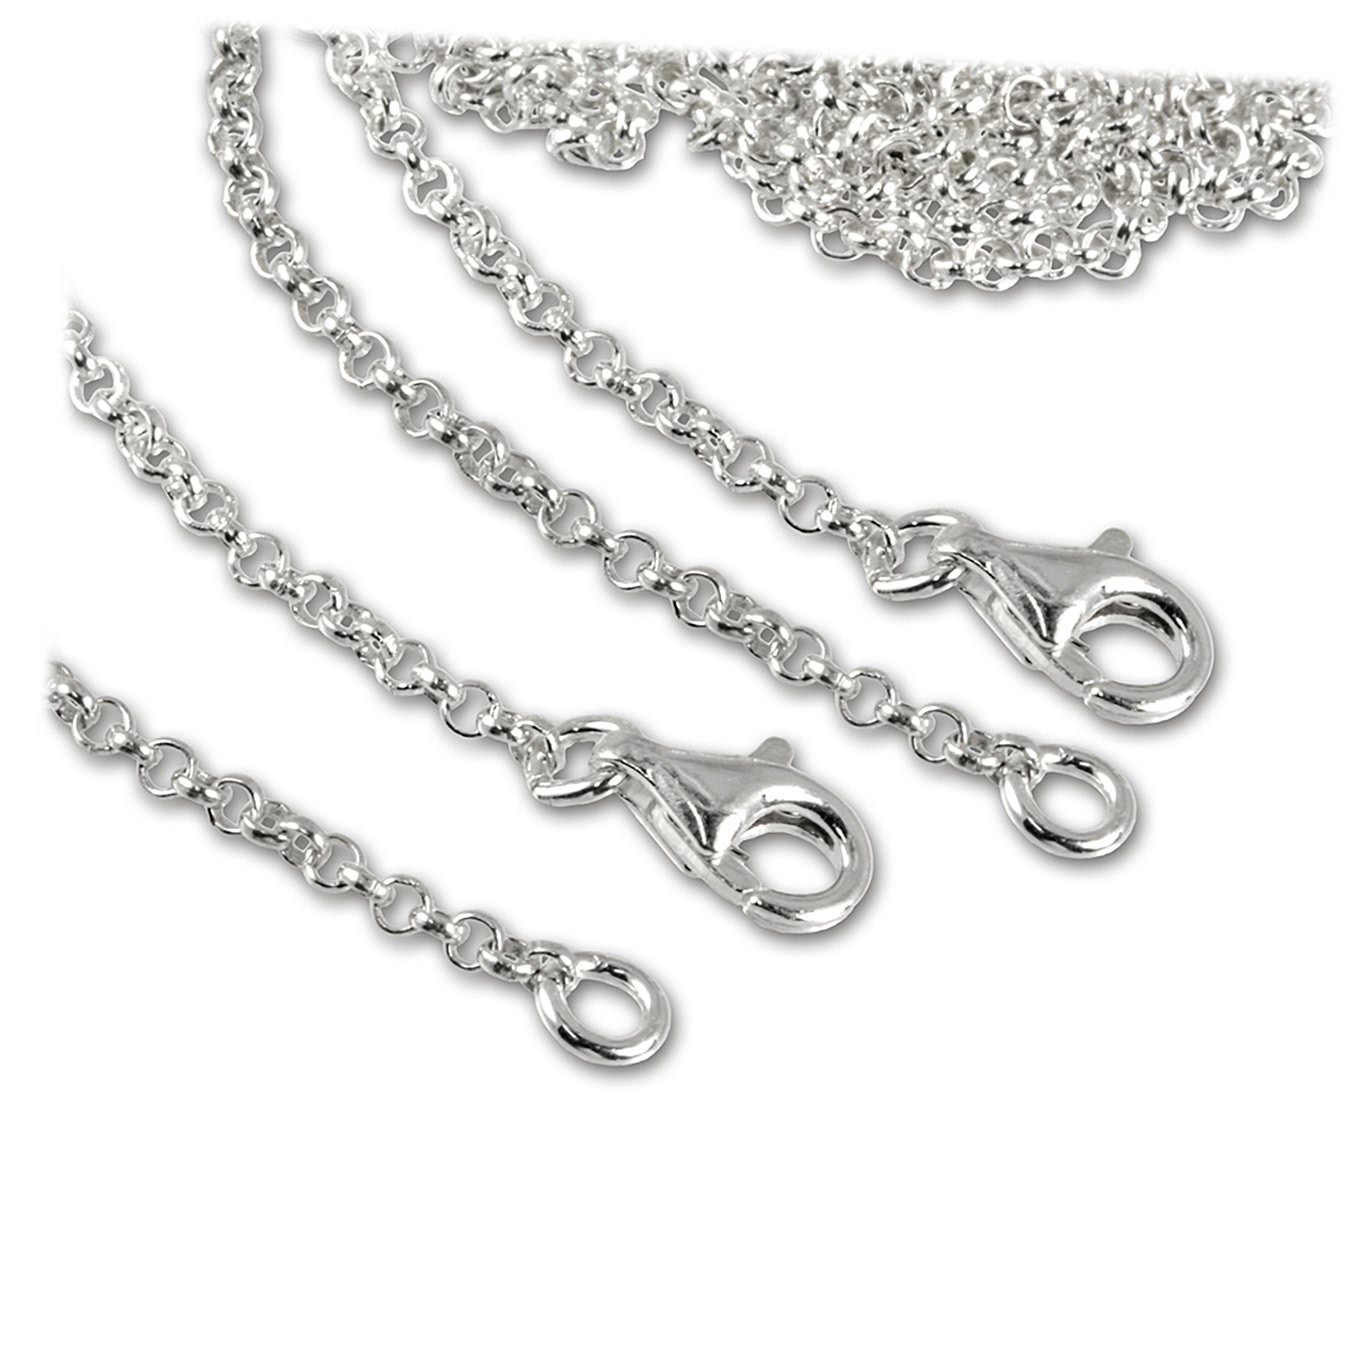 SilberDream Charm-Ketten-Set »FC00295-2 SilberDream Charmskette für Charms«  (Charmsketten), Charmsketten beide Ketten ca. 50cm, 925 Sterling Silber,  Farbe: silber, Made-In Germany online kaufen | OTTO